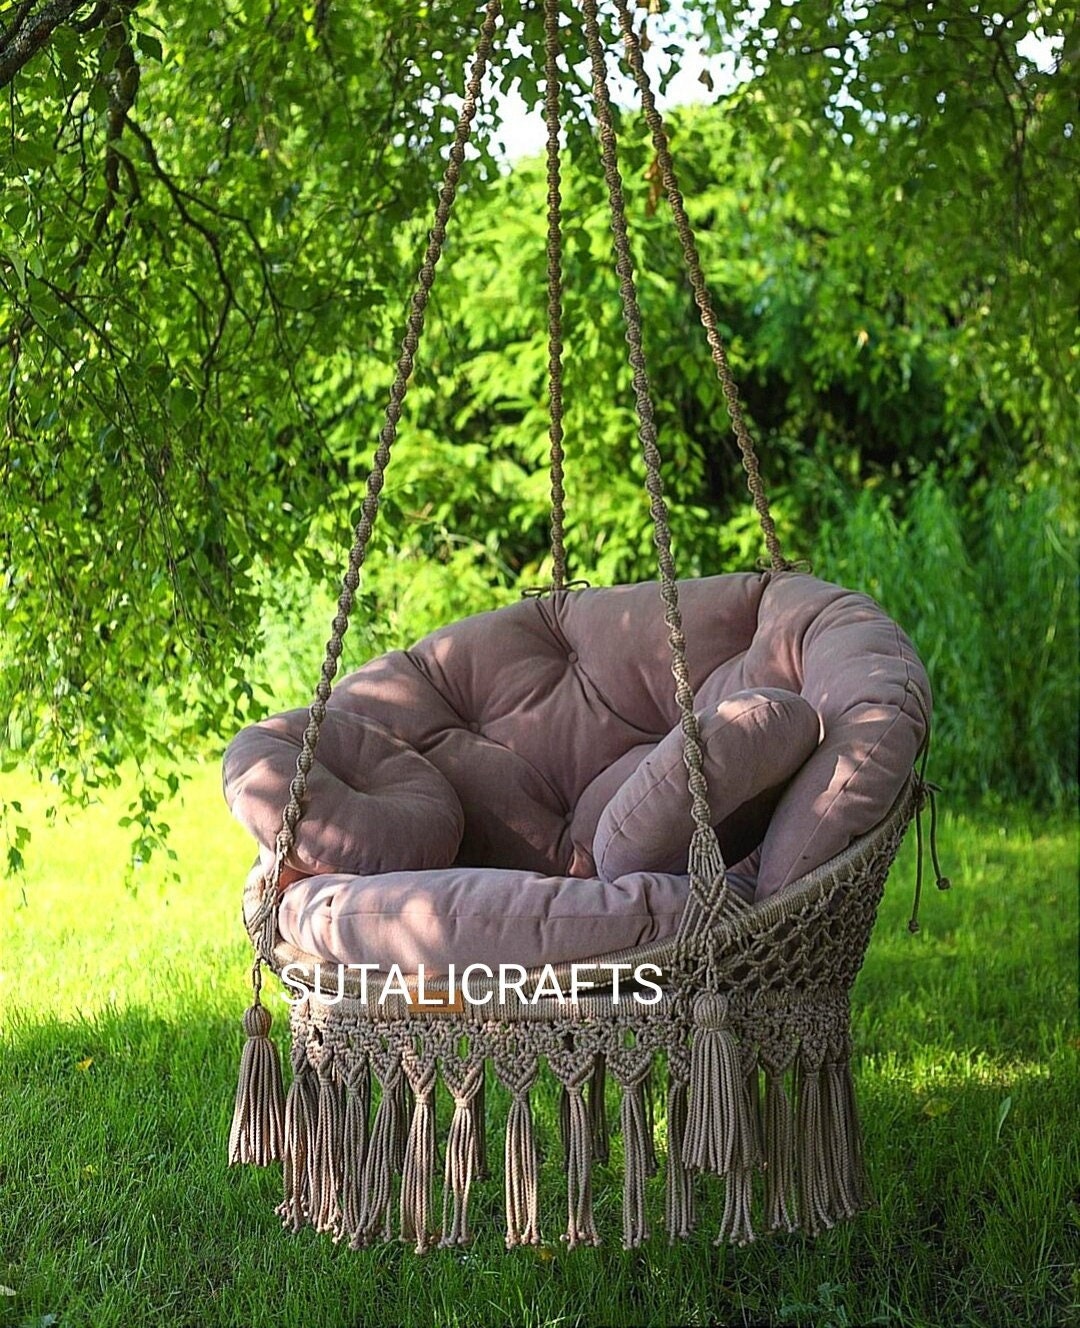 OA&WA Hanging Basket Chair Cushions, Large Seat Cushion Waterproof Hanging  Egg Hammock Swing Chair Pads Soft Chair Back Solid Color (Color : Yellow